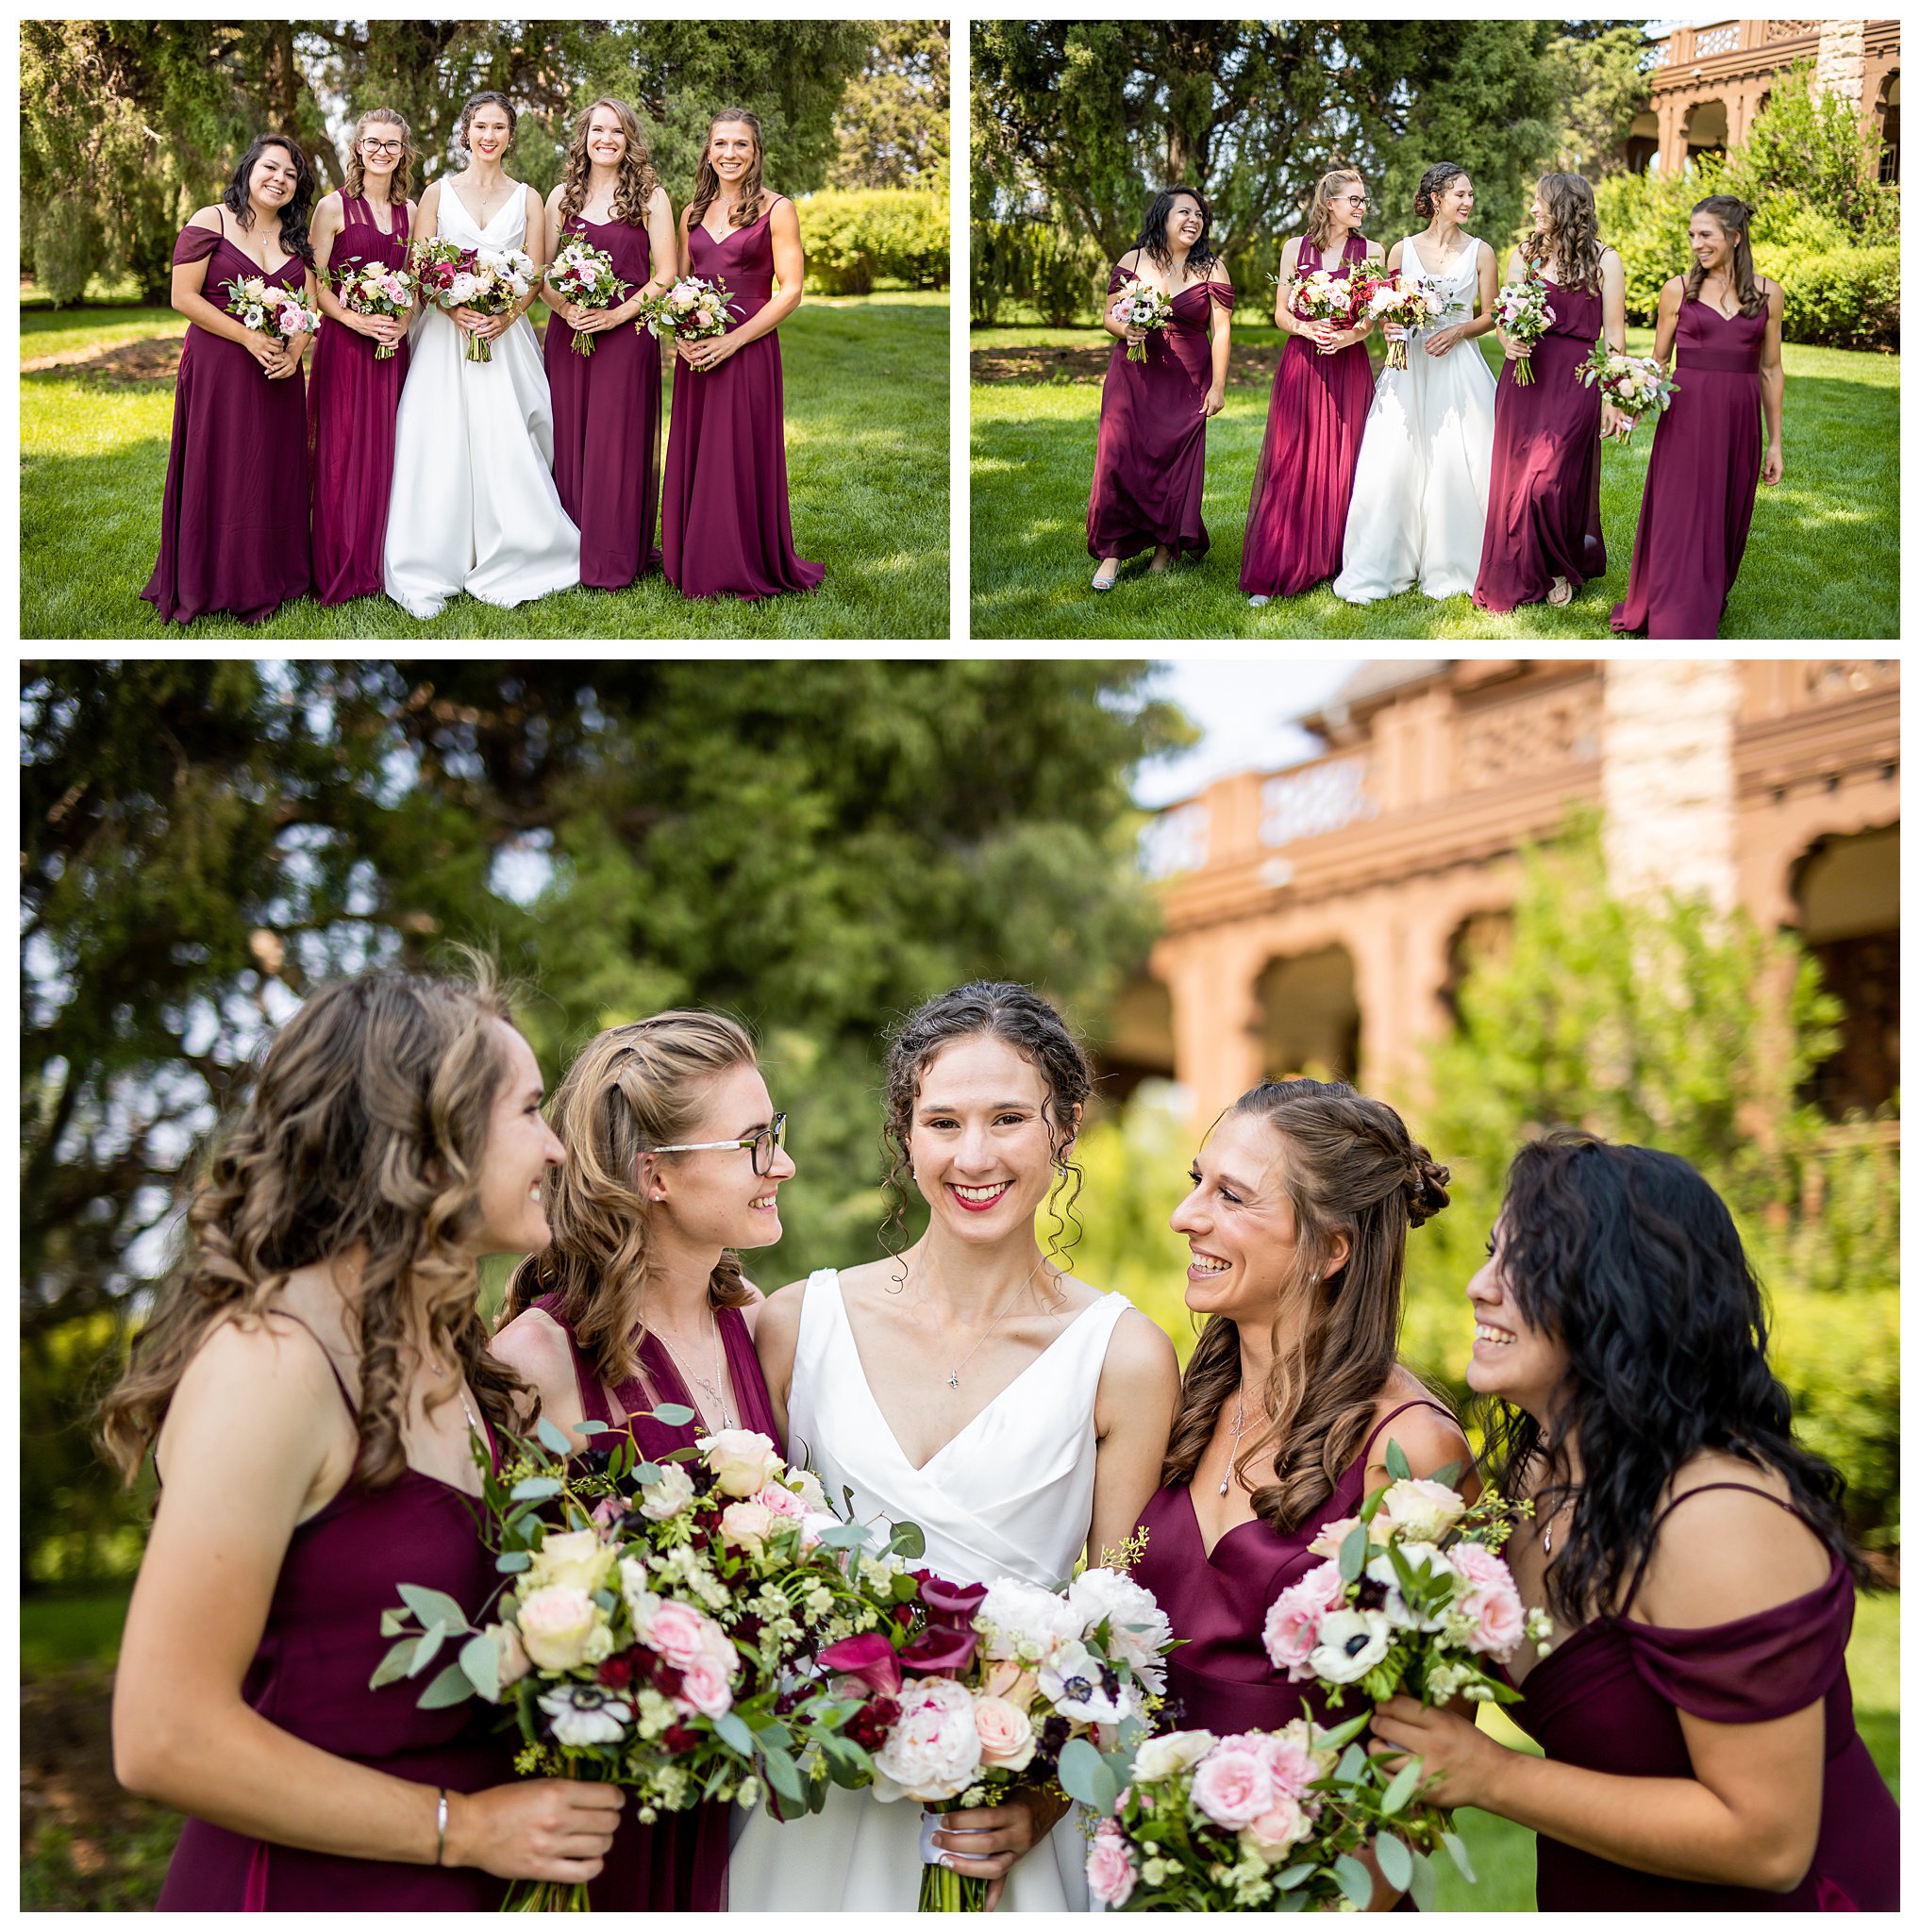 A bride poses with her bridesmaids